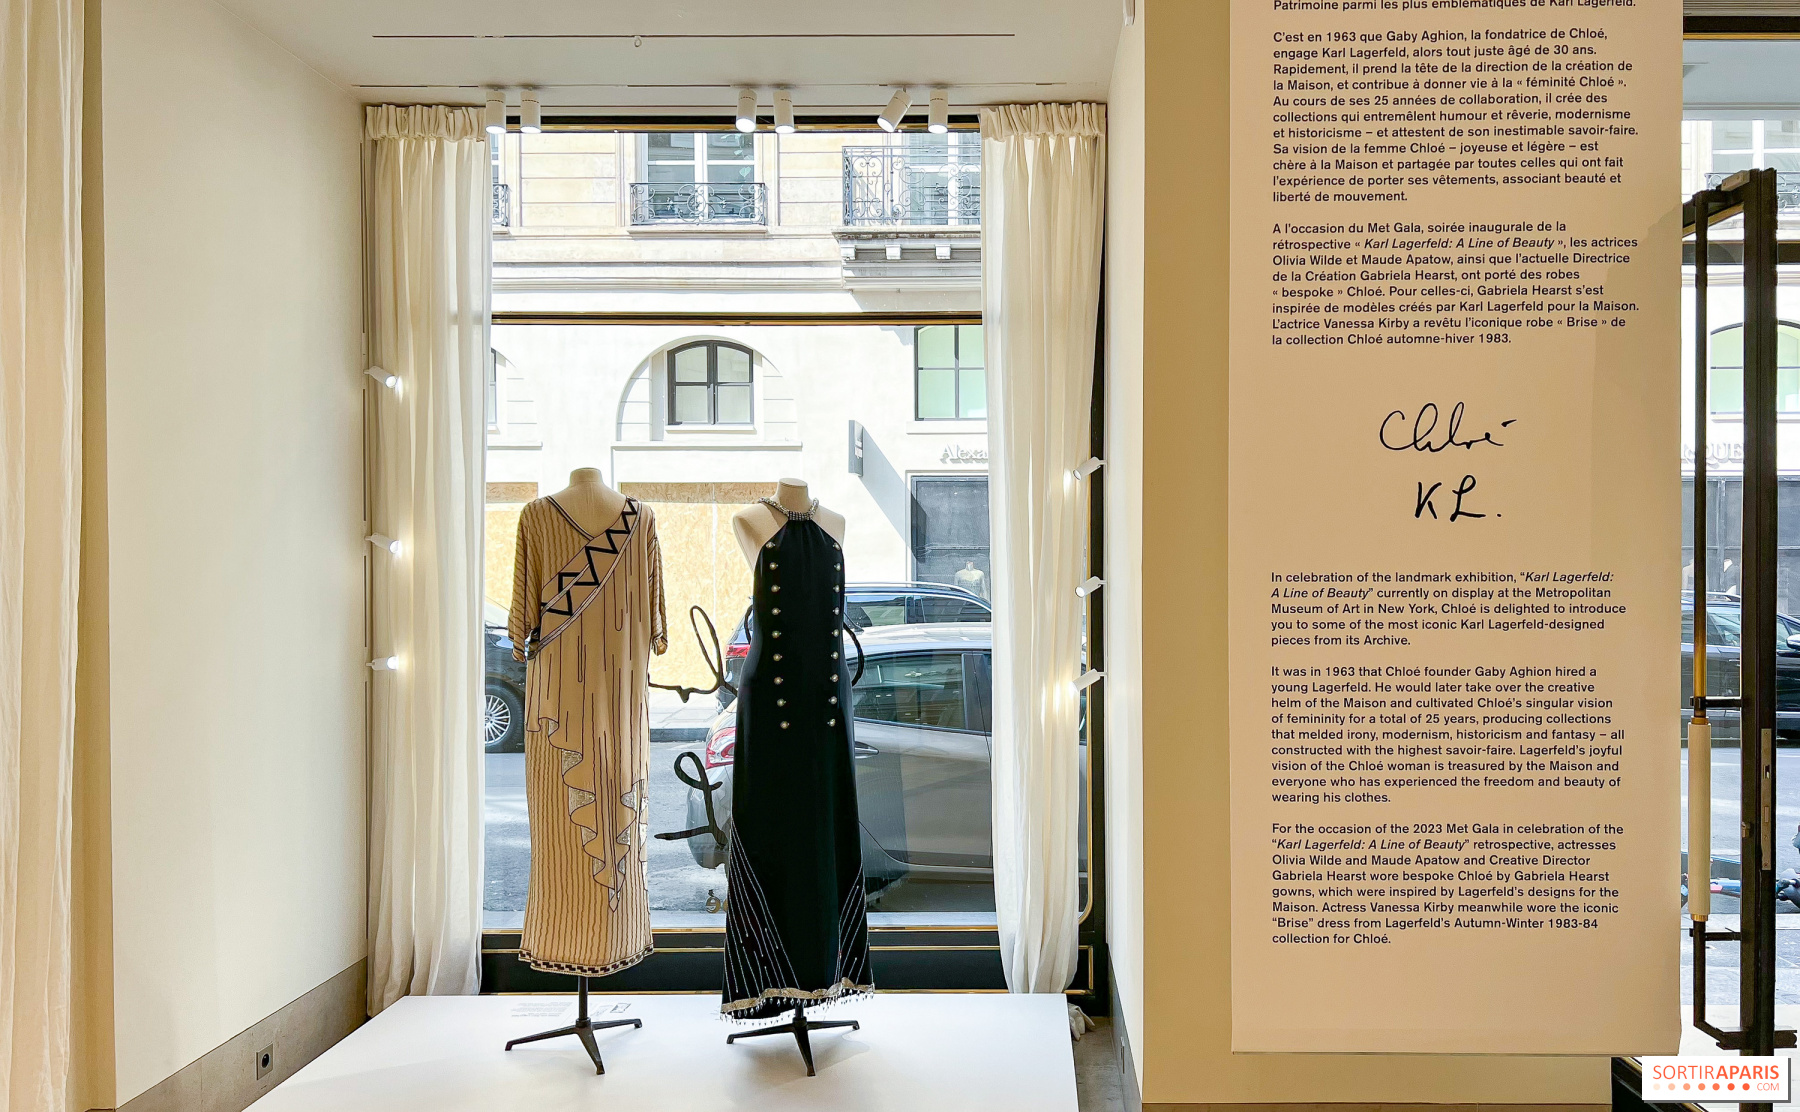 Fashion Week Haute Couture: the free exhibition of Karl Lagerfeld's years  at Chloé 